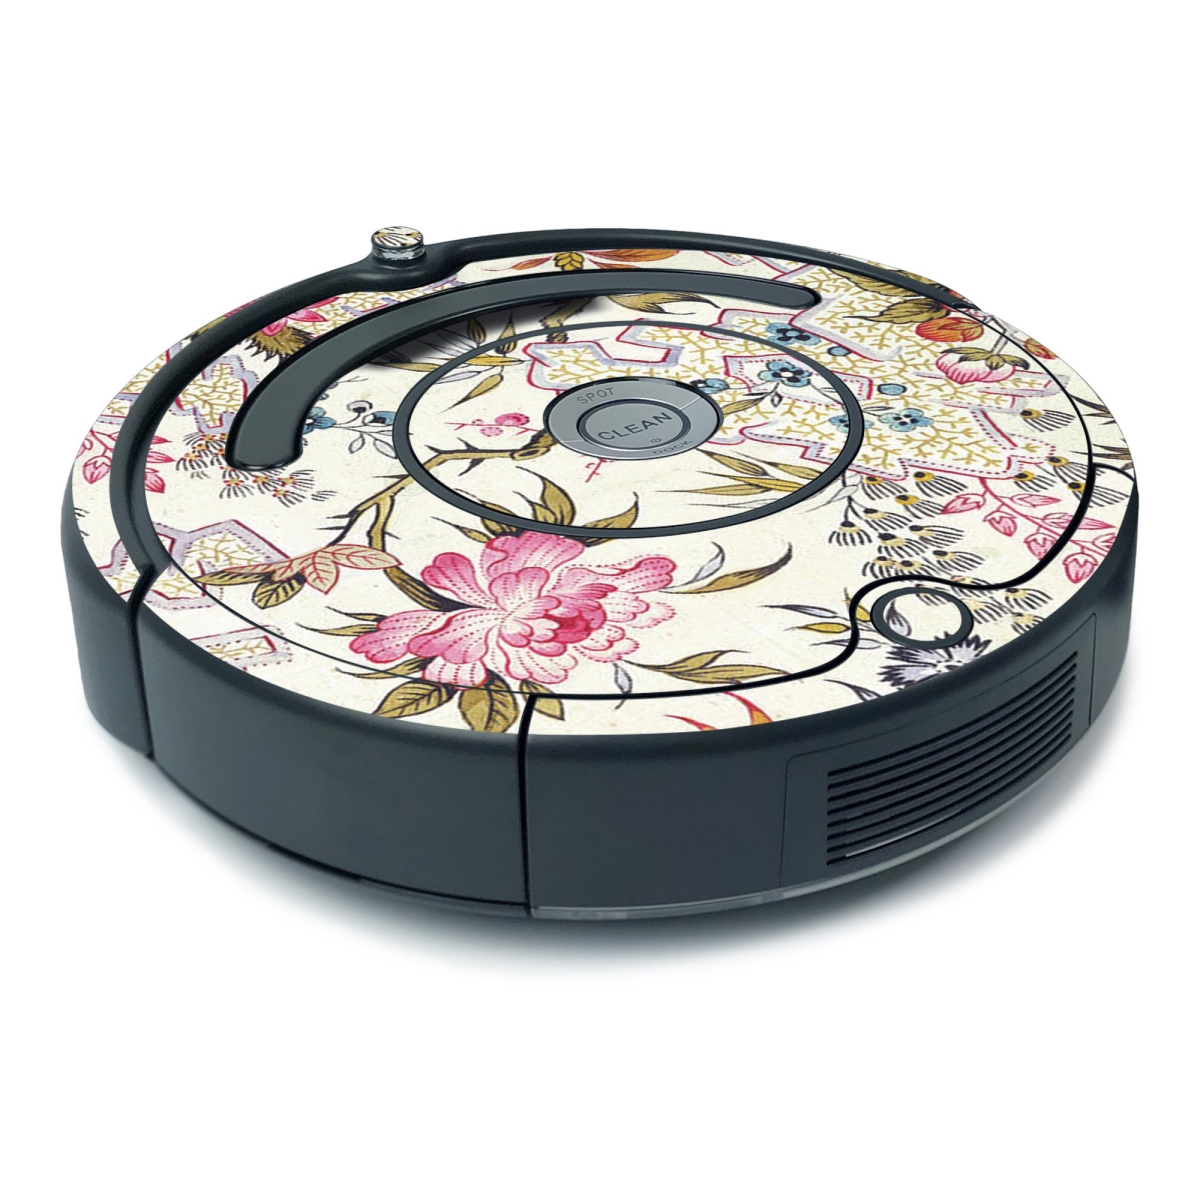 Picture of MightySkins IRRO675MIN-Floral Design Skin for iRobot Roomba 675 Minimal Coverage - Floral Design